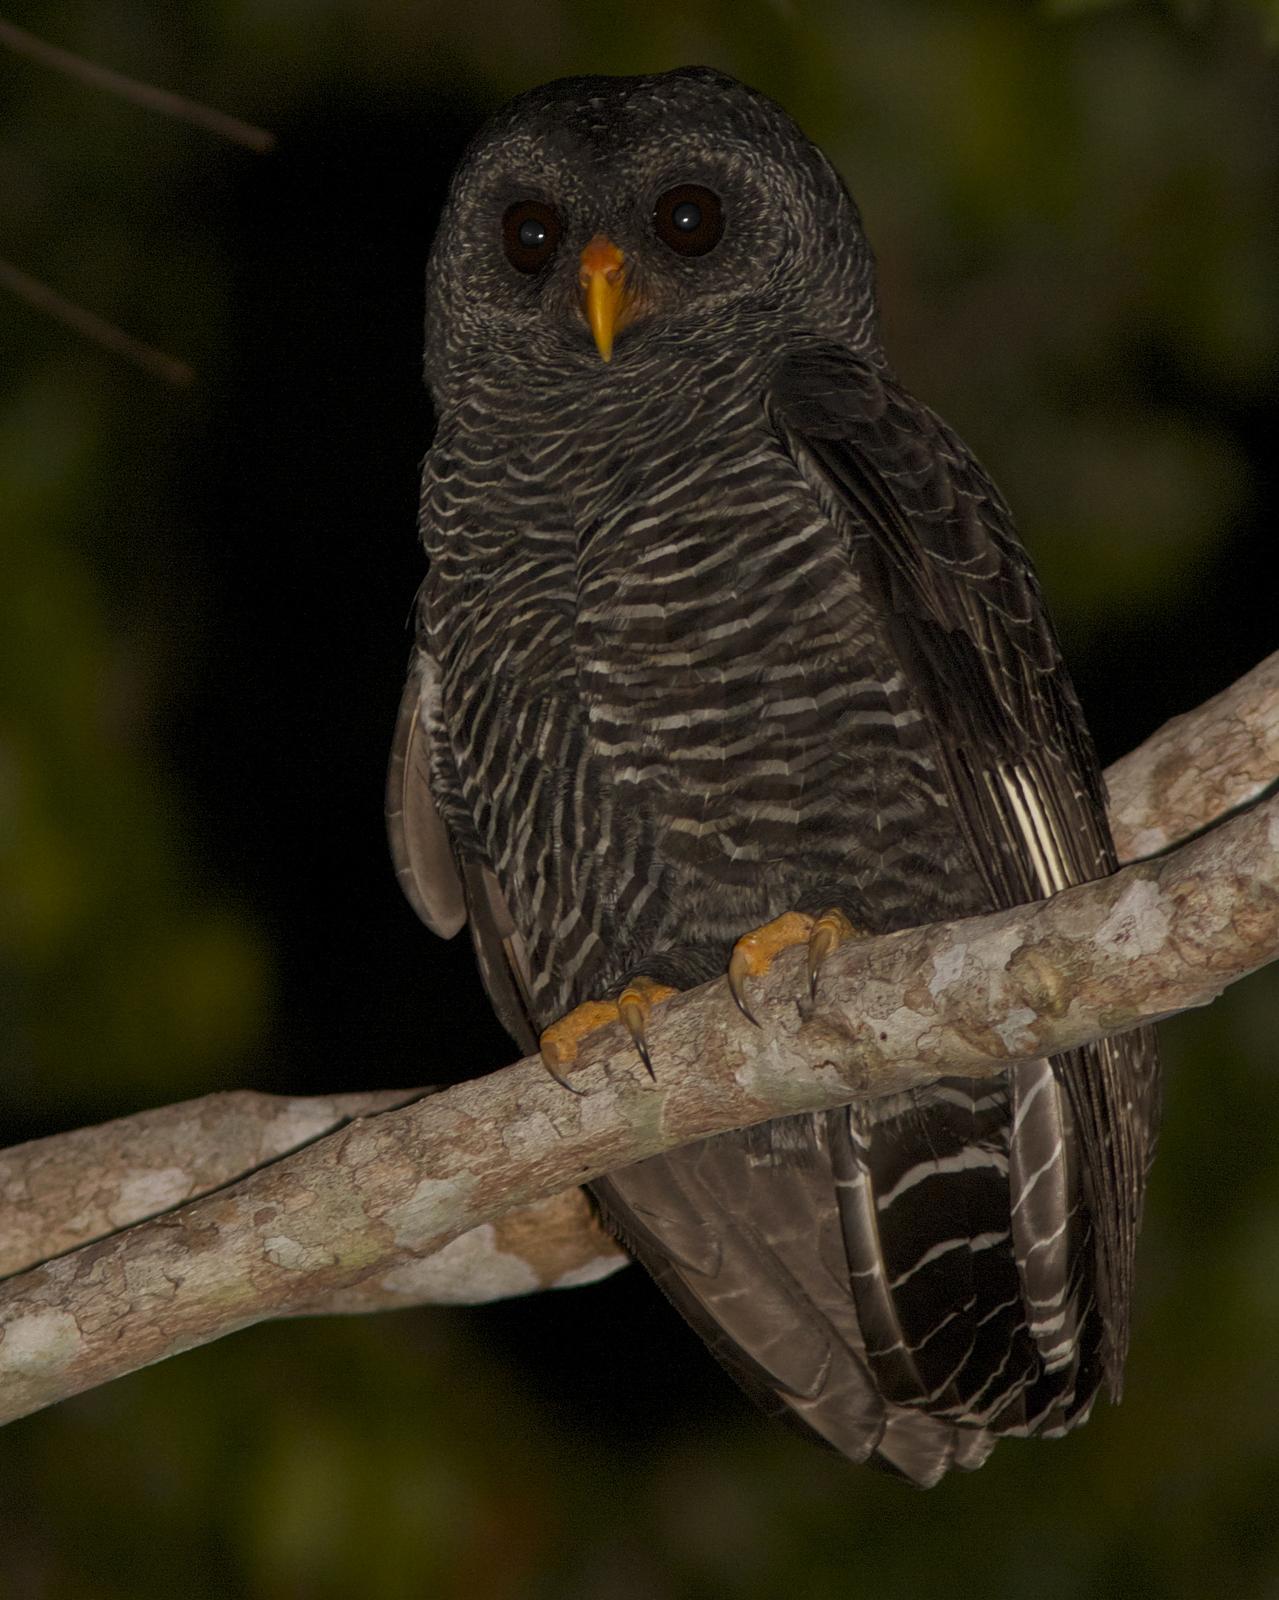 Black-banded Owl Photo by Marcelo Padua